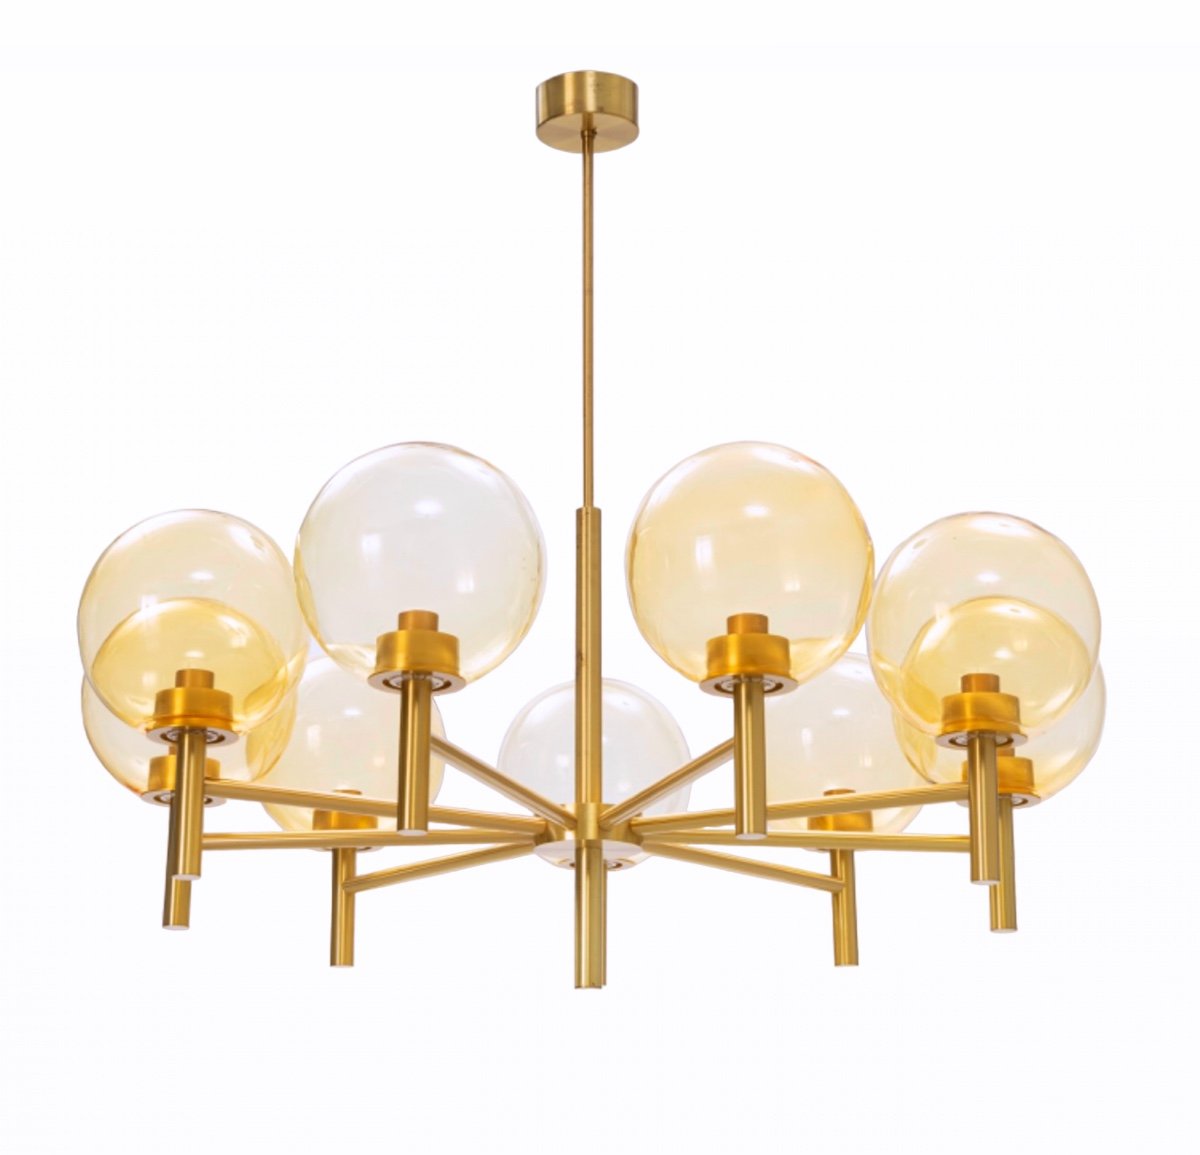 Large Luxus Chandelier With 9 Lights In Golden Brass And Amber Glass Globes, Sweden 1970s/80s-photo-7